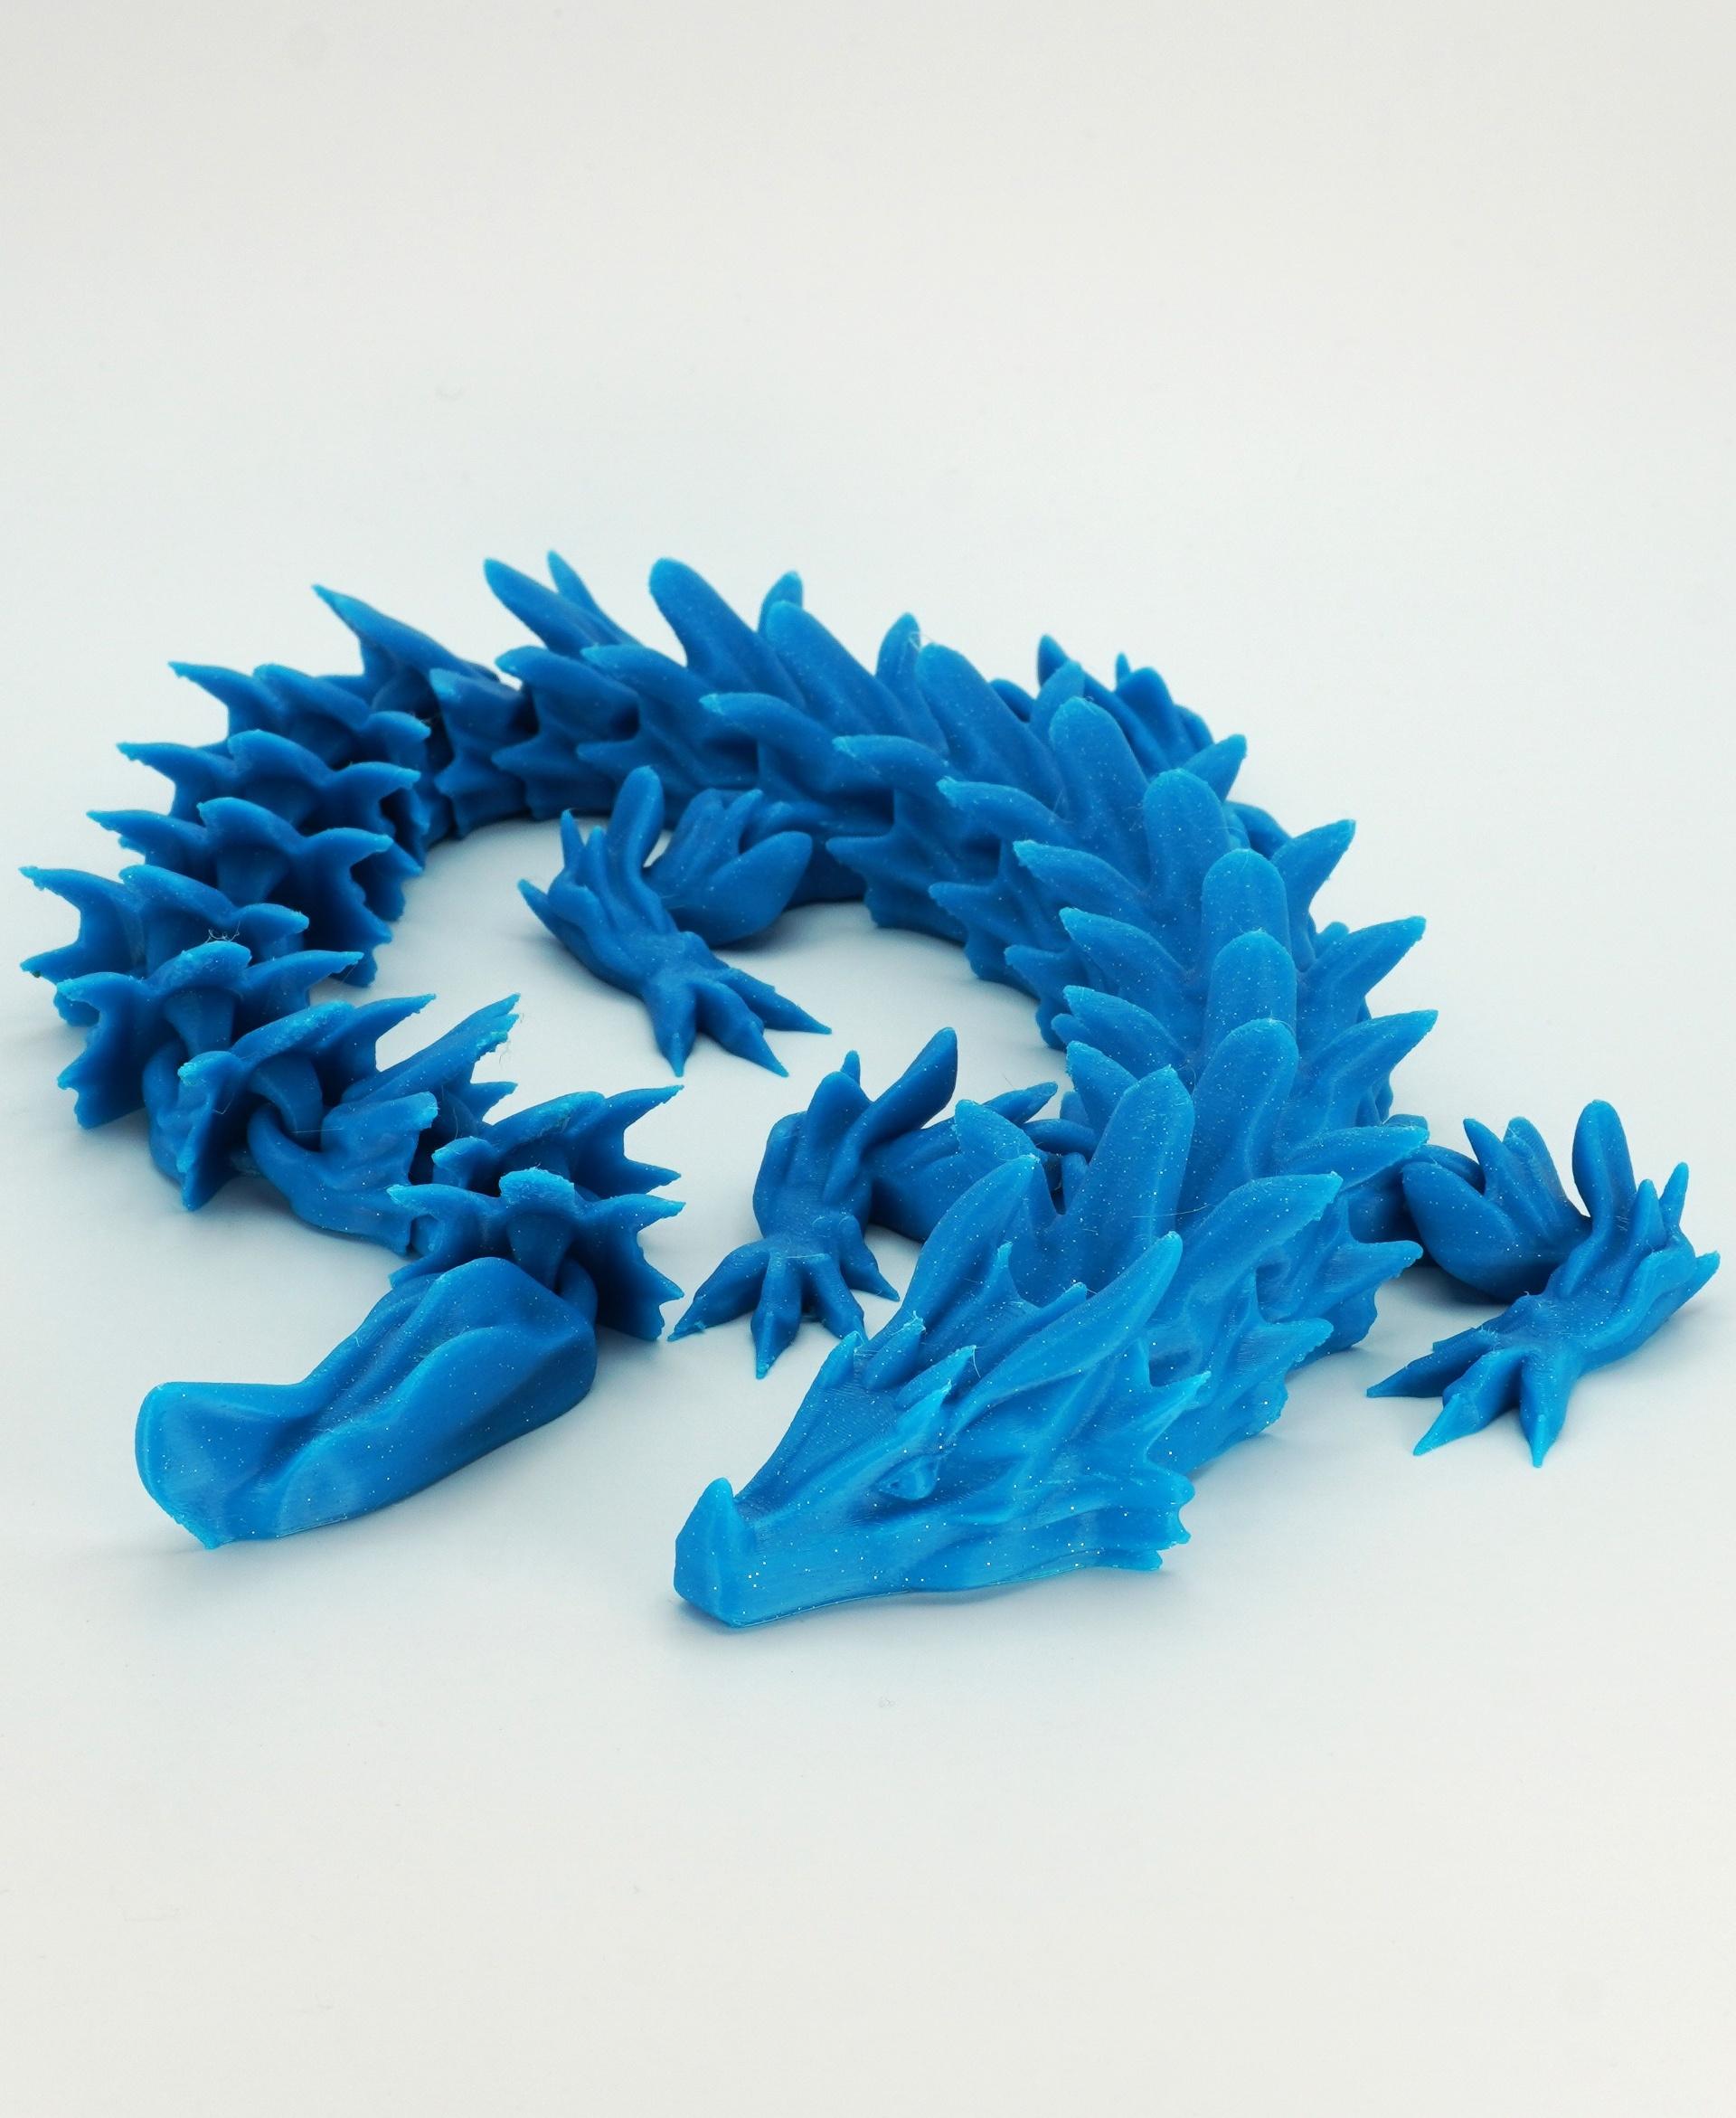 Water Dragon - Articulated dragon 3d model